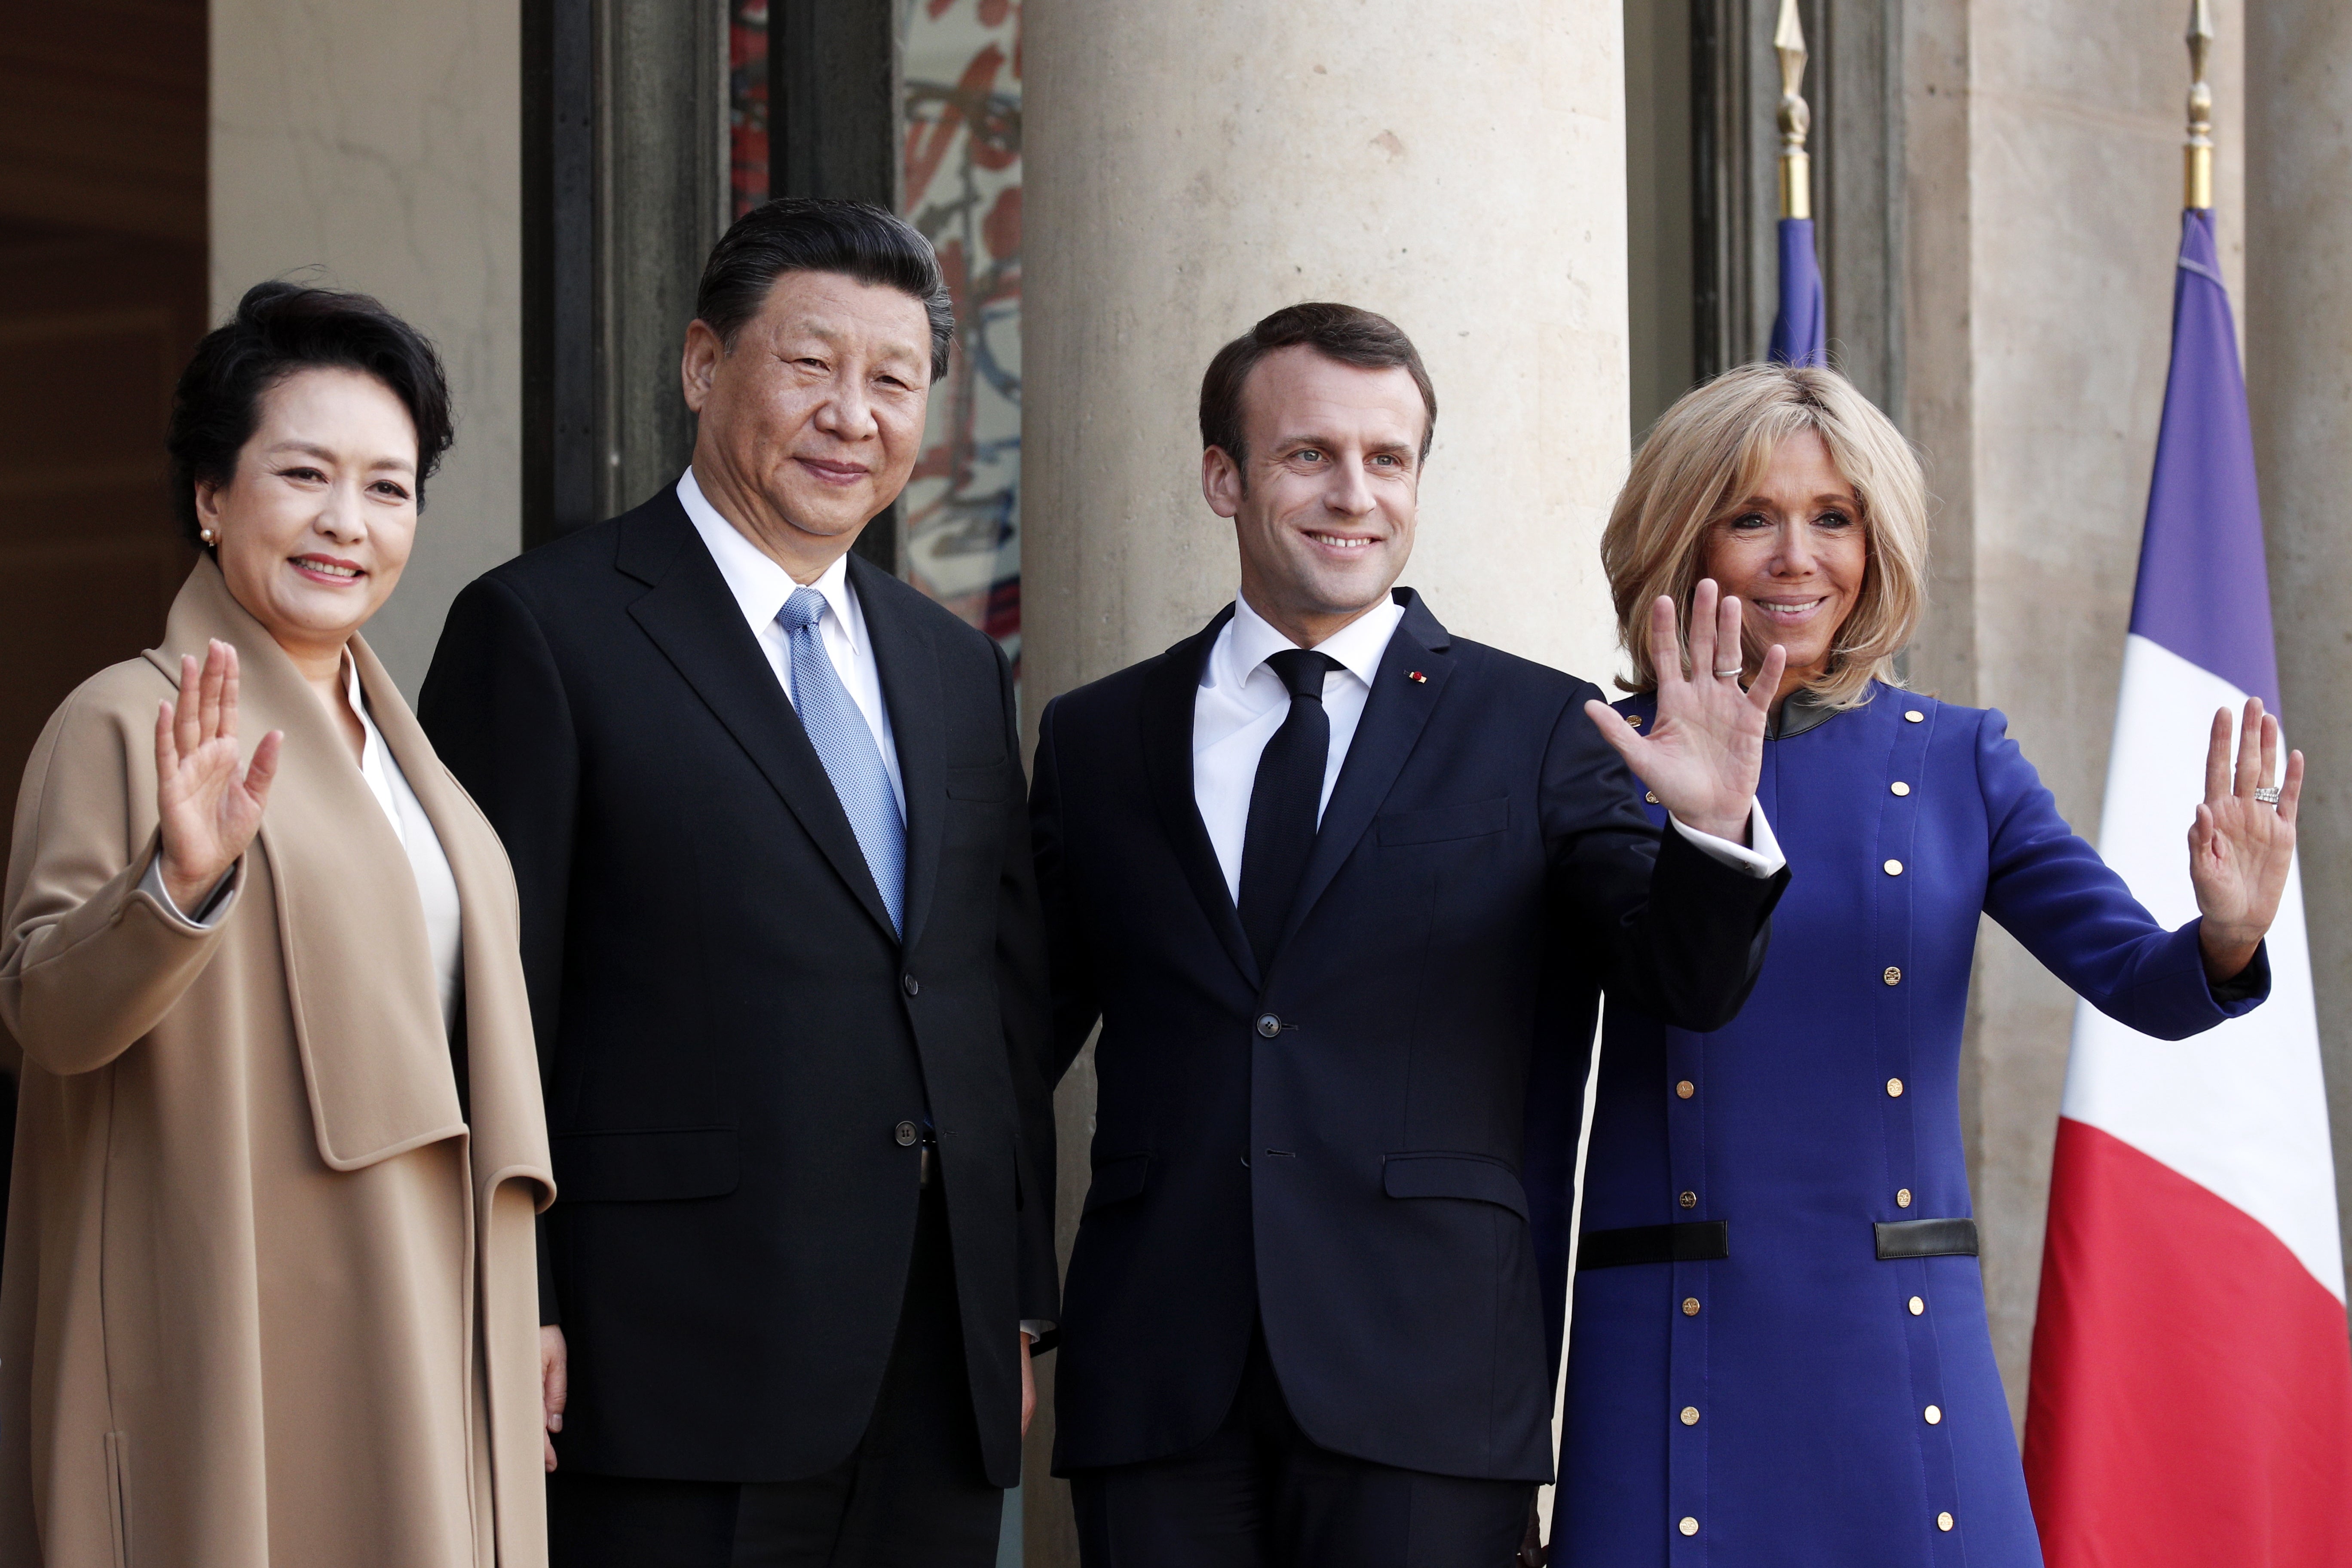 France may have get a free hand in dealing with China after Merkel